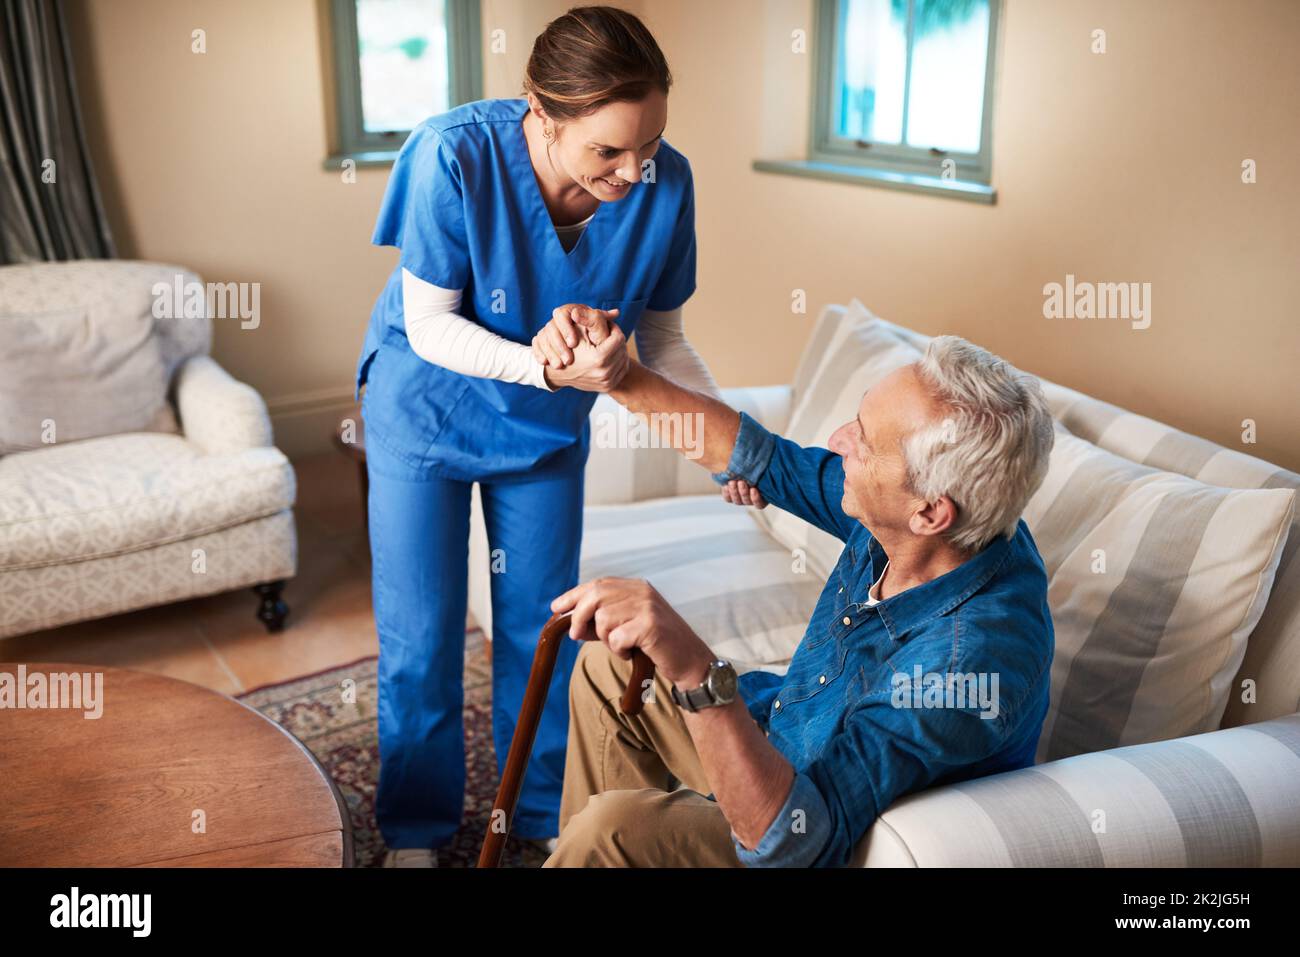 Her caring nature makes her the perfect caregiver. Shot of a caregiver assisting her senior patient at home. Stock Photo